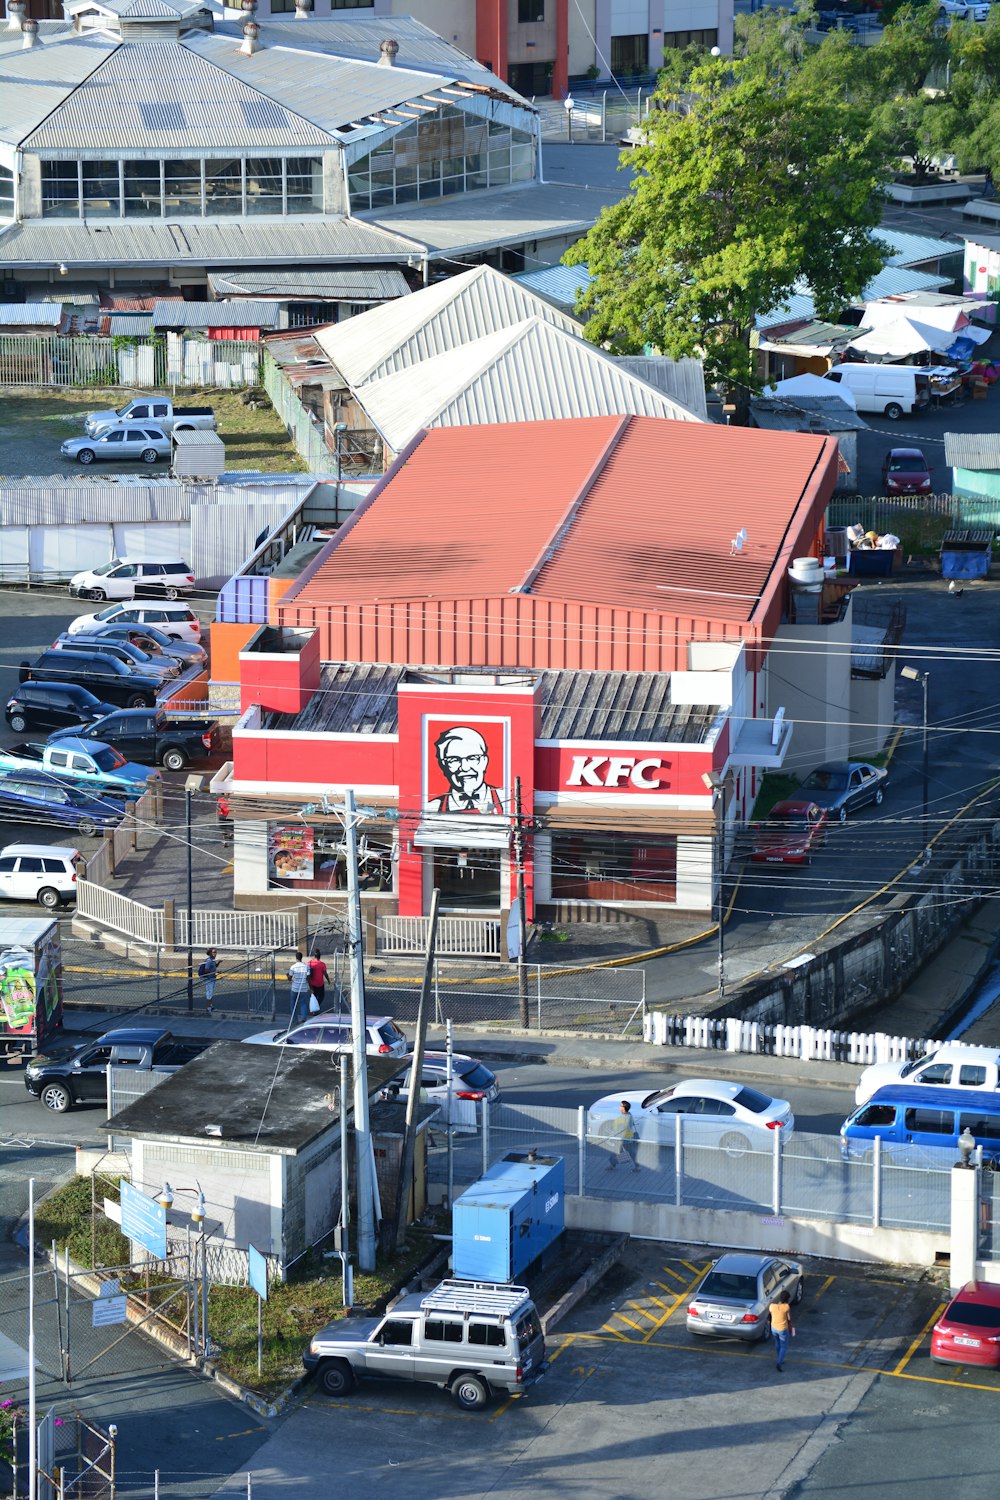 KFC building beside vehicles parked at the parking lot during day